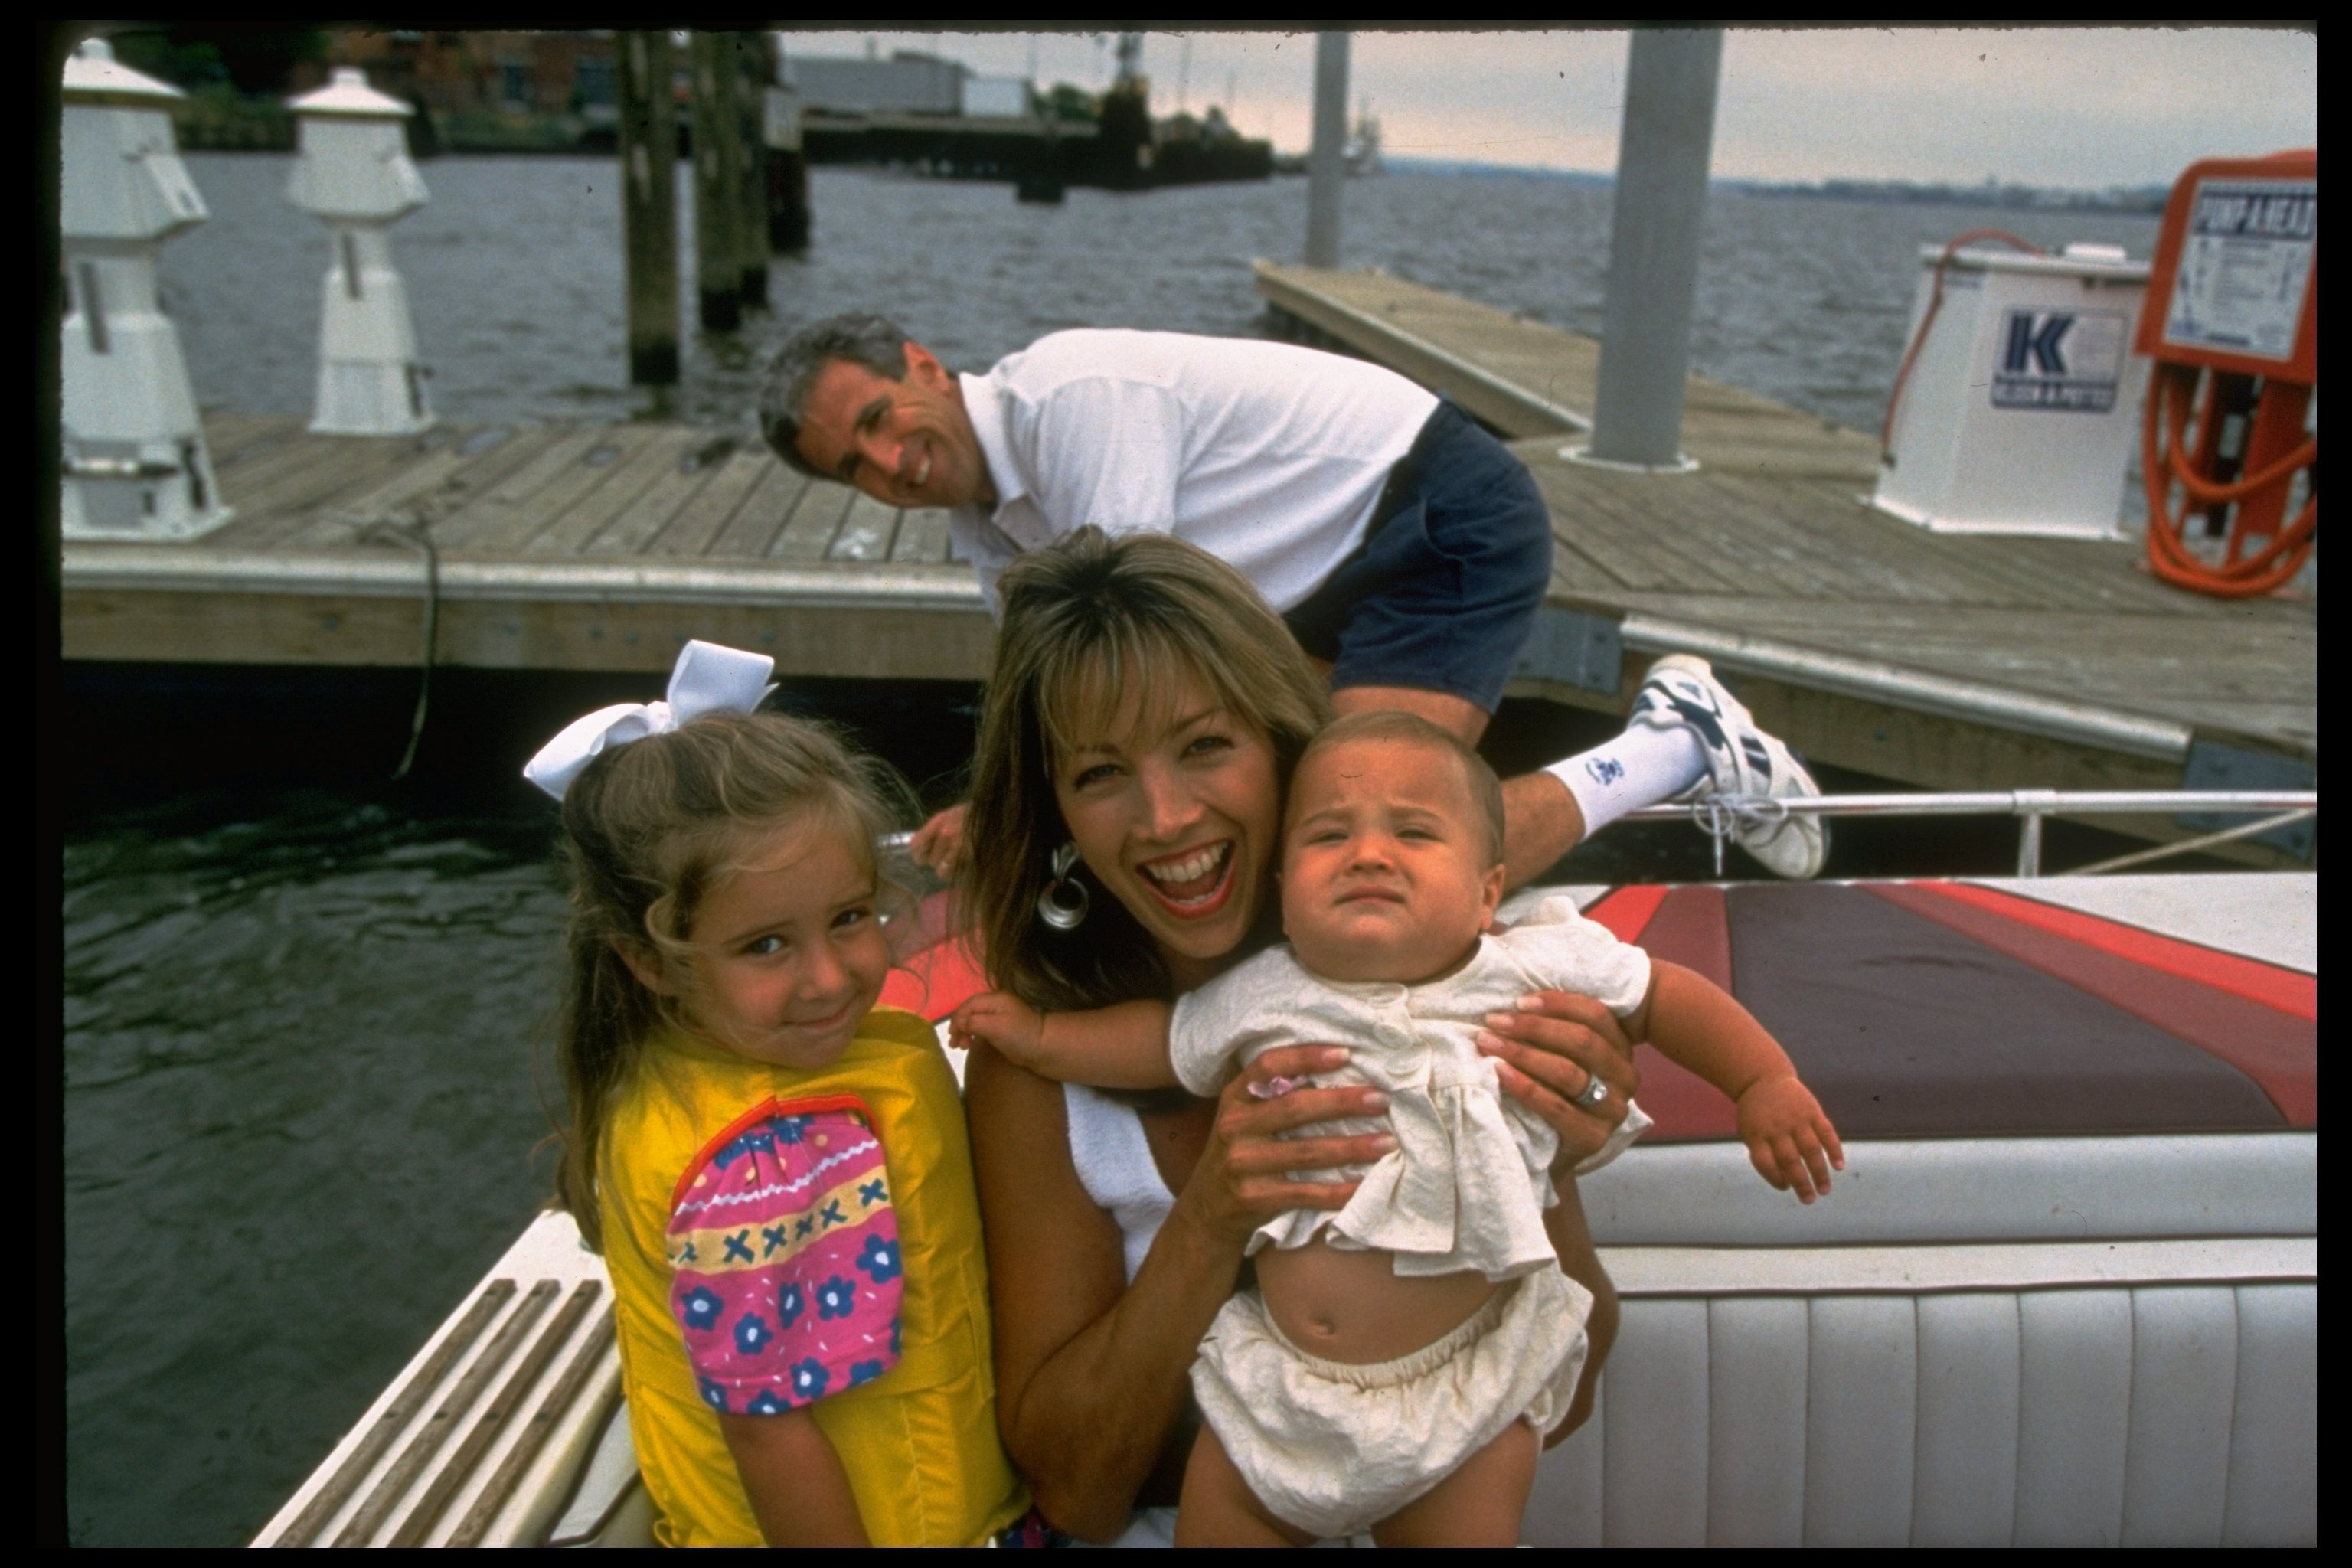 Denise Austin and Jeff Austin with their daughters Kelly, 3, and Katie, 7 months, aboard their 24-foot powerboat on June 3, 1992, in Potomac River, N. Virginia |  Source: Getty Images